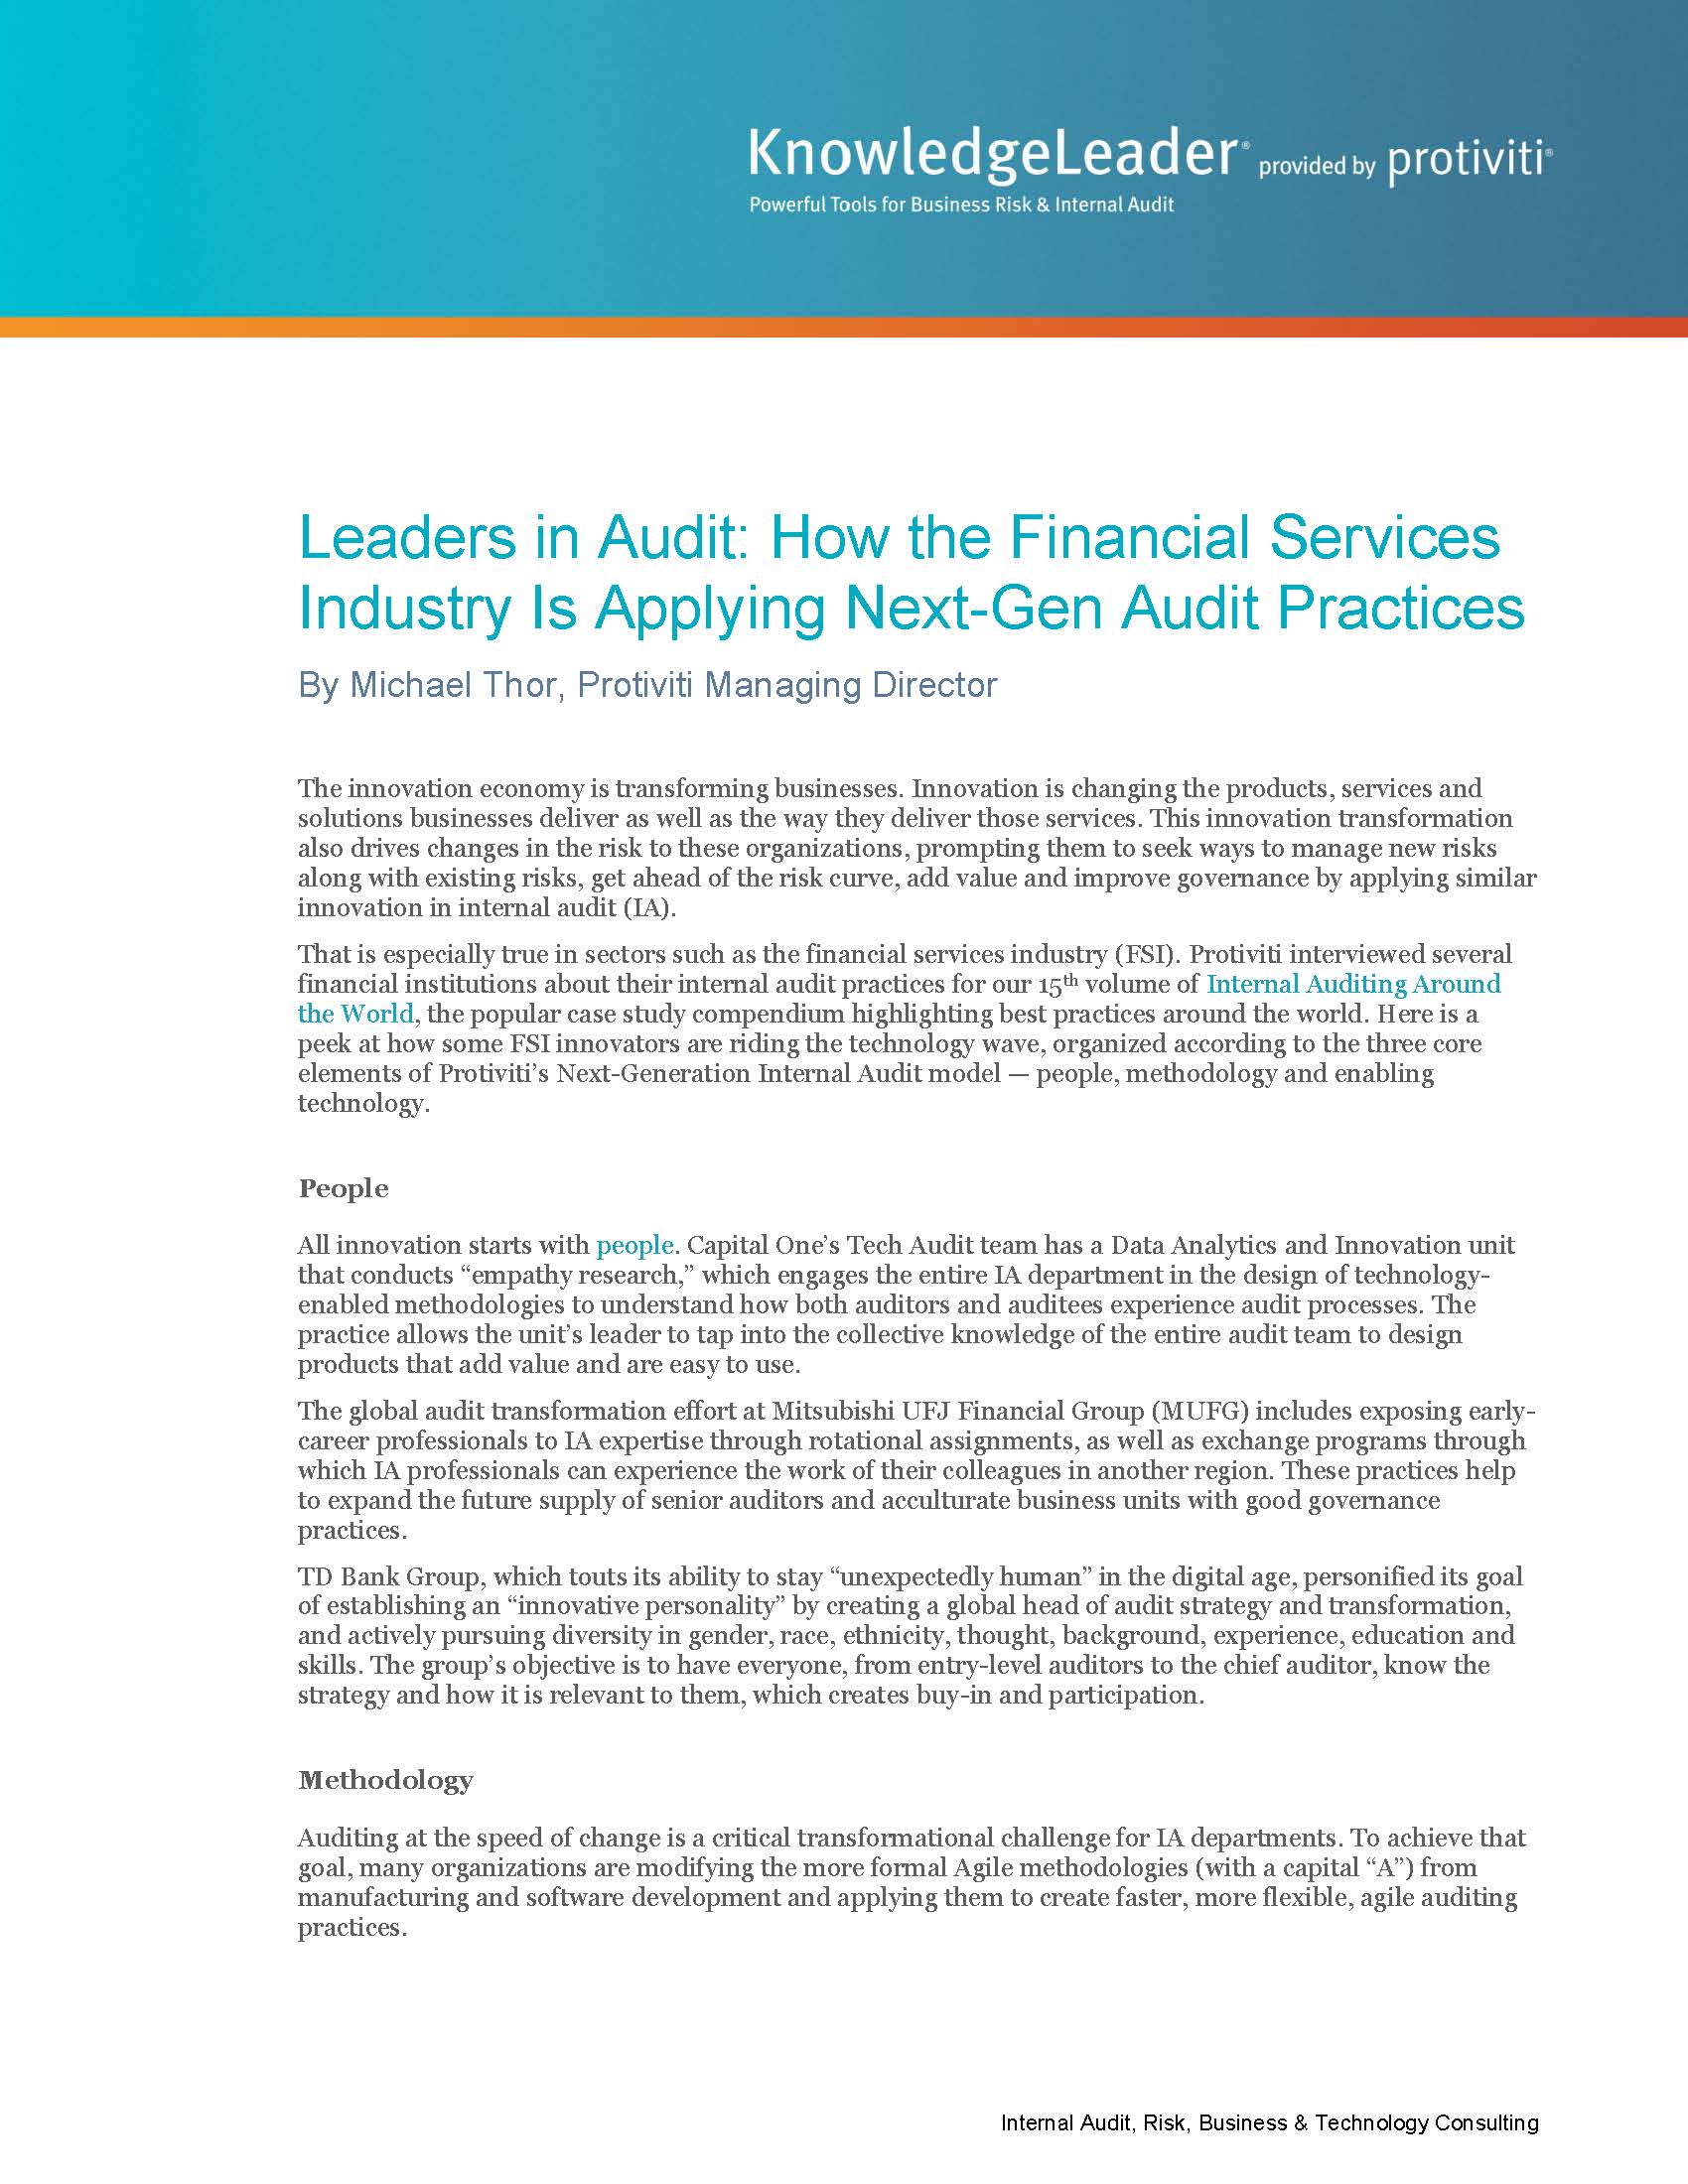 Screenshot of the first page of Leaders in Audit How the Financial Services Industry Is Applying Next-Gen Audit Practices